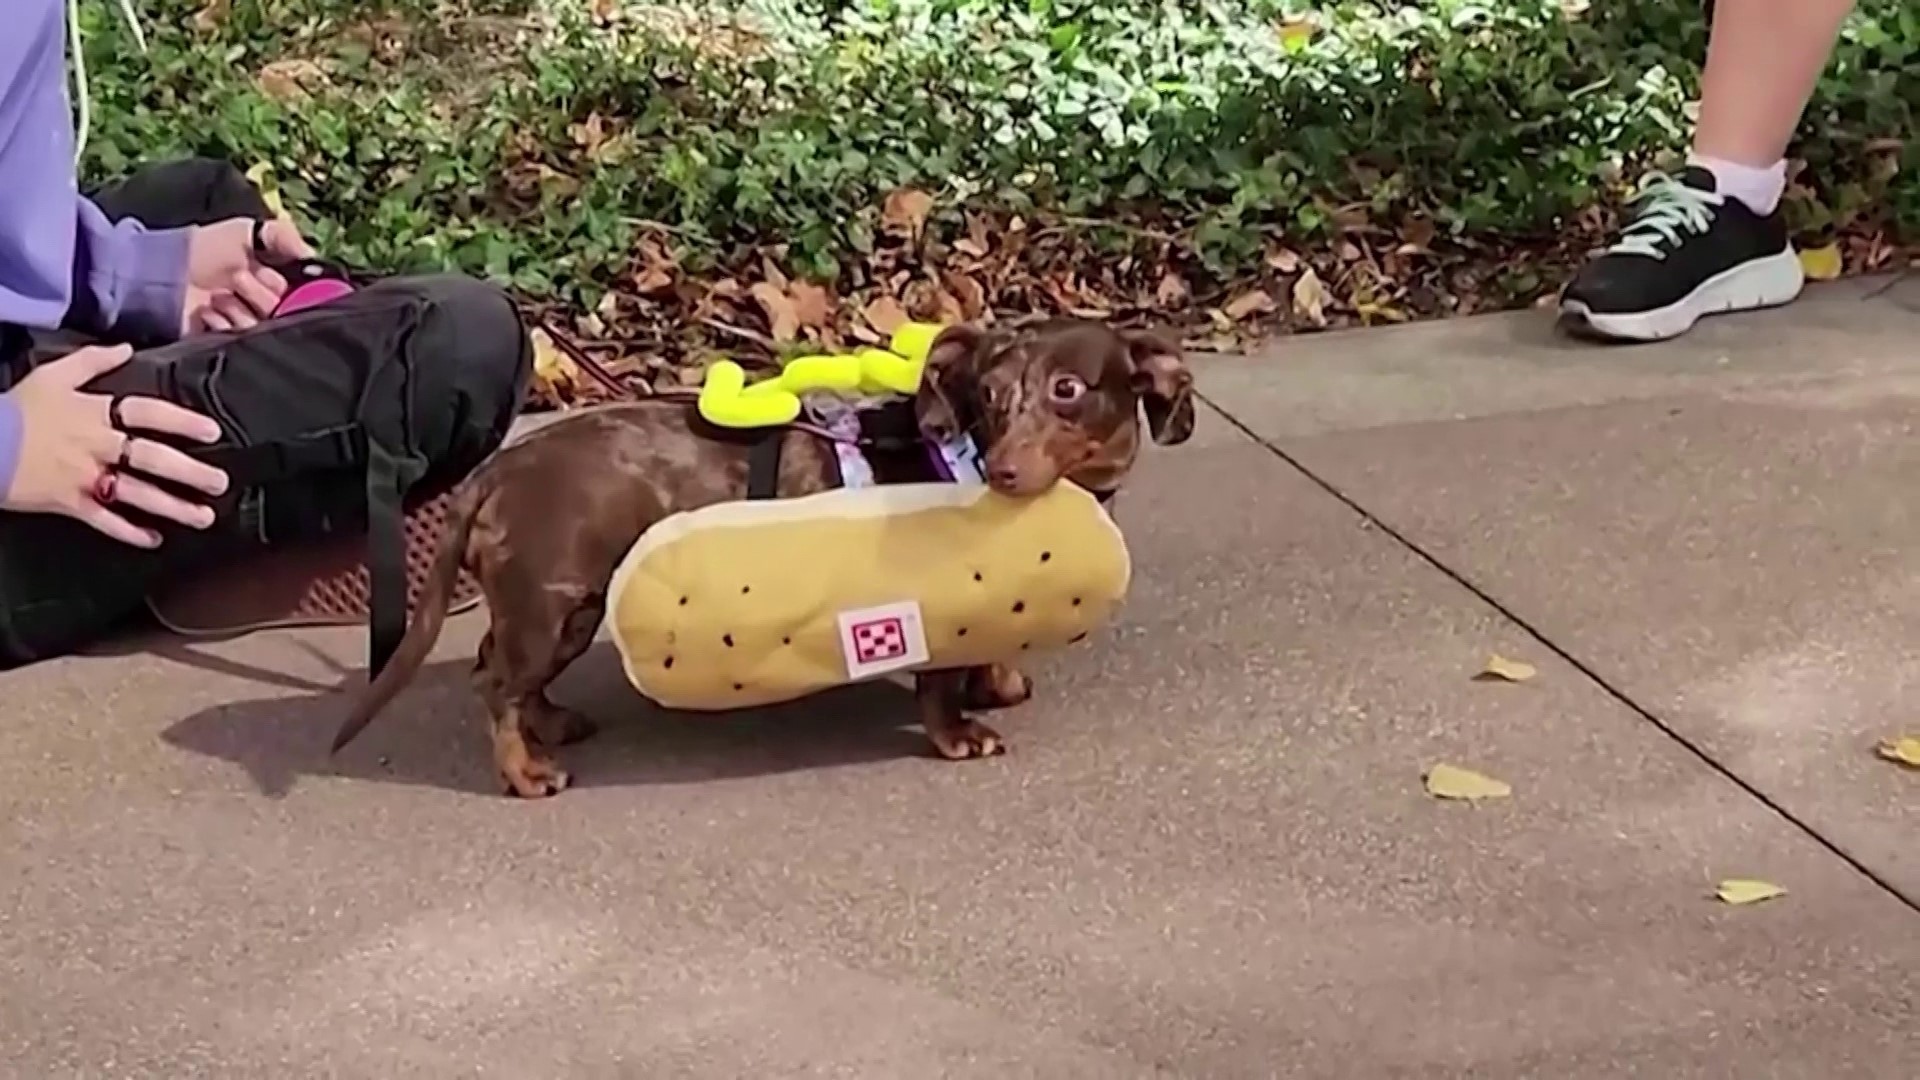 Dachshunds competed for the top dog on Friday at the annual Running of the Wiener Dogs in Cincinnati, Ohio.